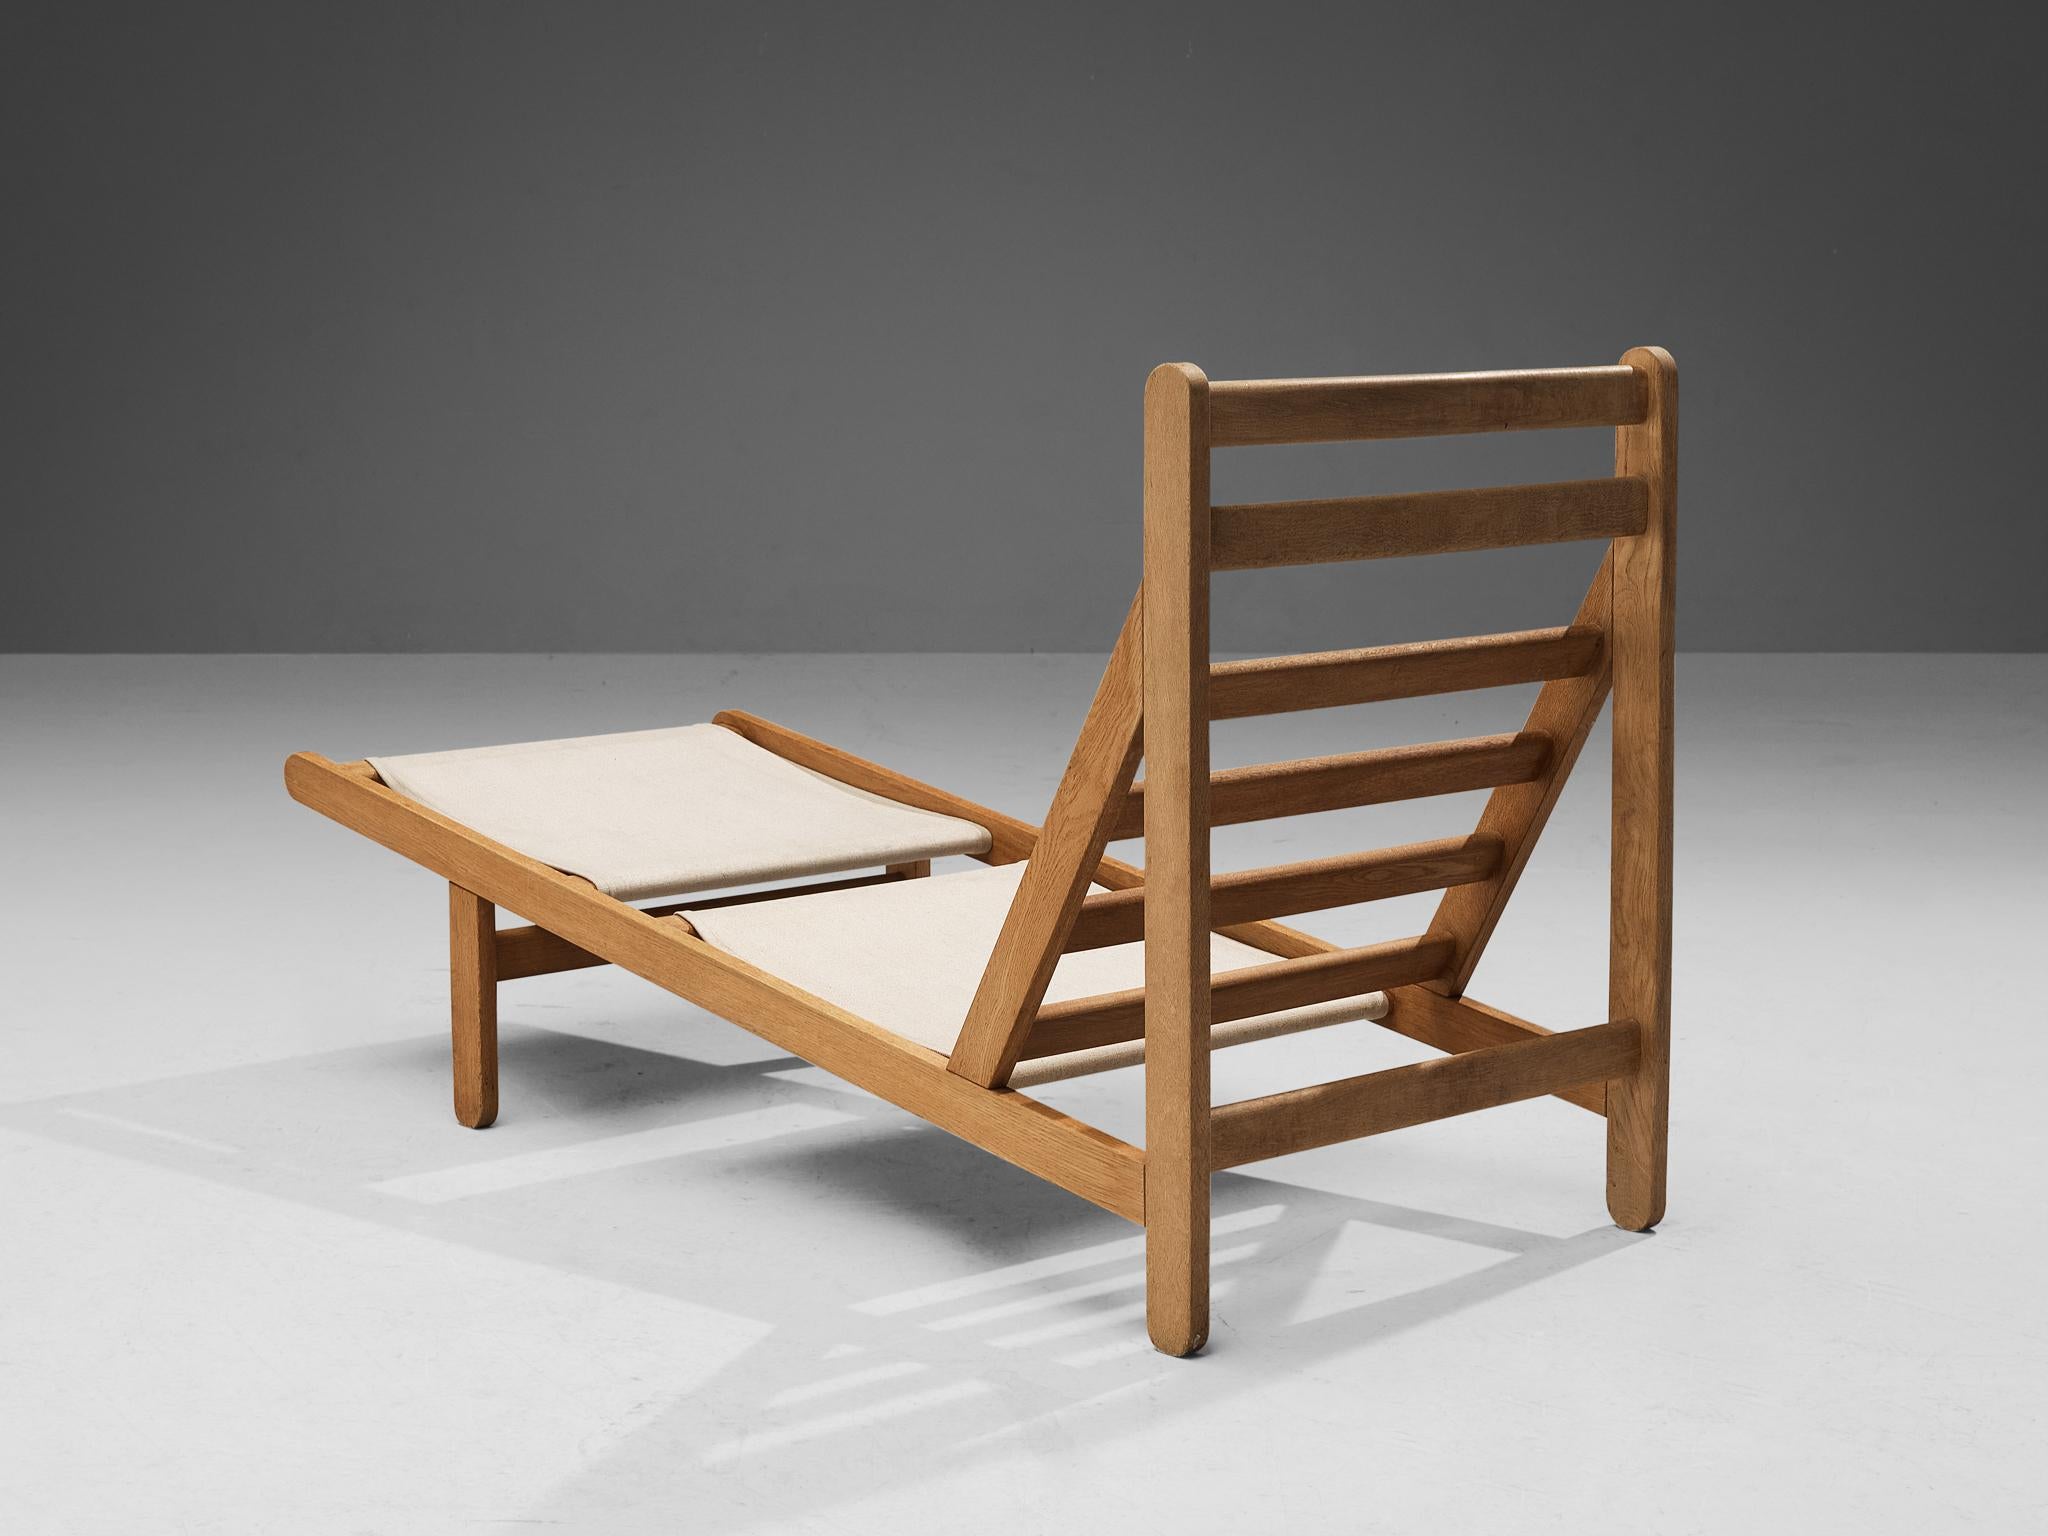 Bernt Petersen, 'Rag' chaise longue, oak, canvas, brass, Denmark, circa 1965

A well-proportioned lounge chair that is designed according to the Danish design paradigm from the mid-20th century. Clear and simple in line, high-quality craftsmanship,